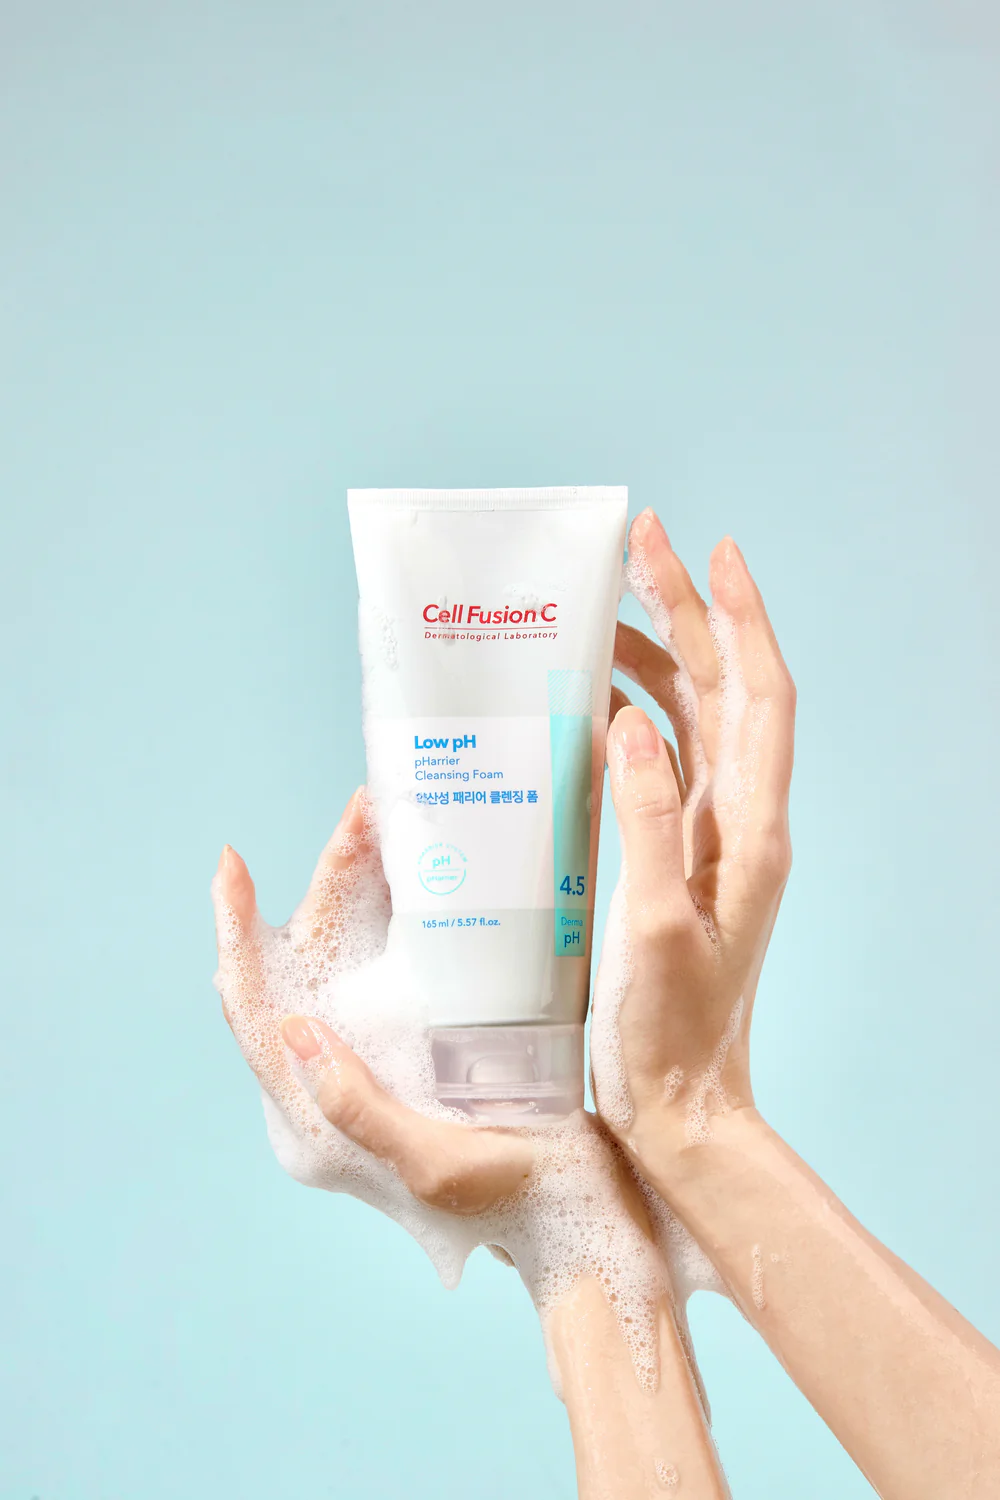 [Cell Fusion C] Low pH pHarrier Cleansing Foam